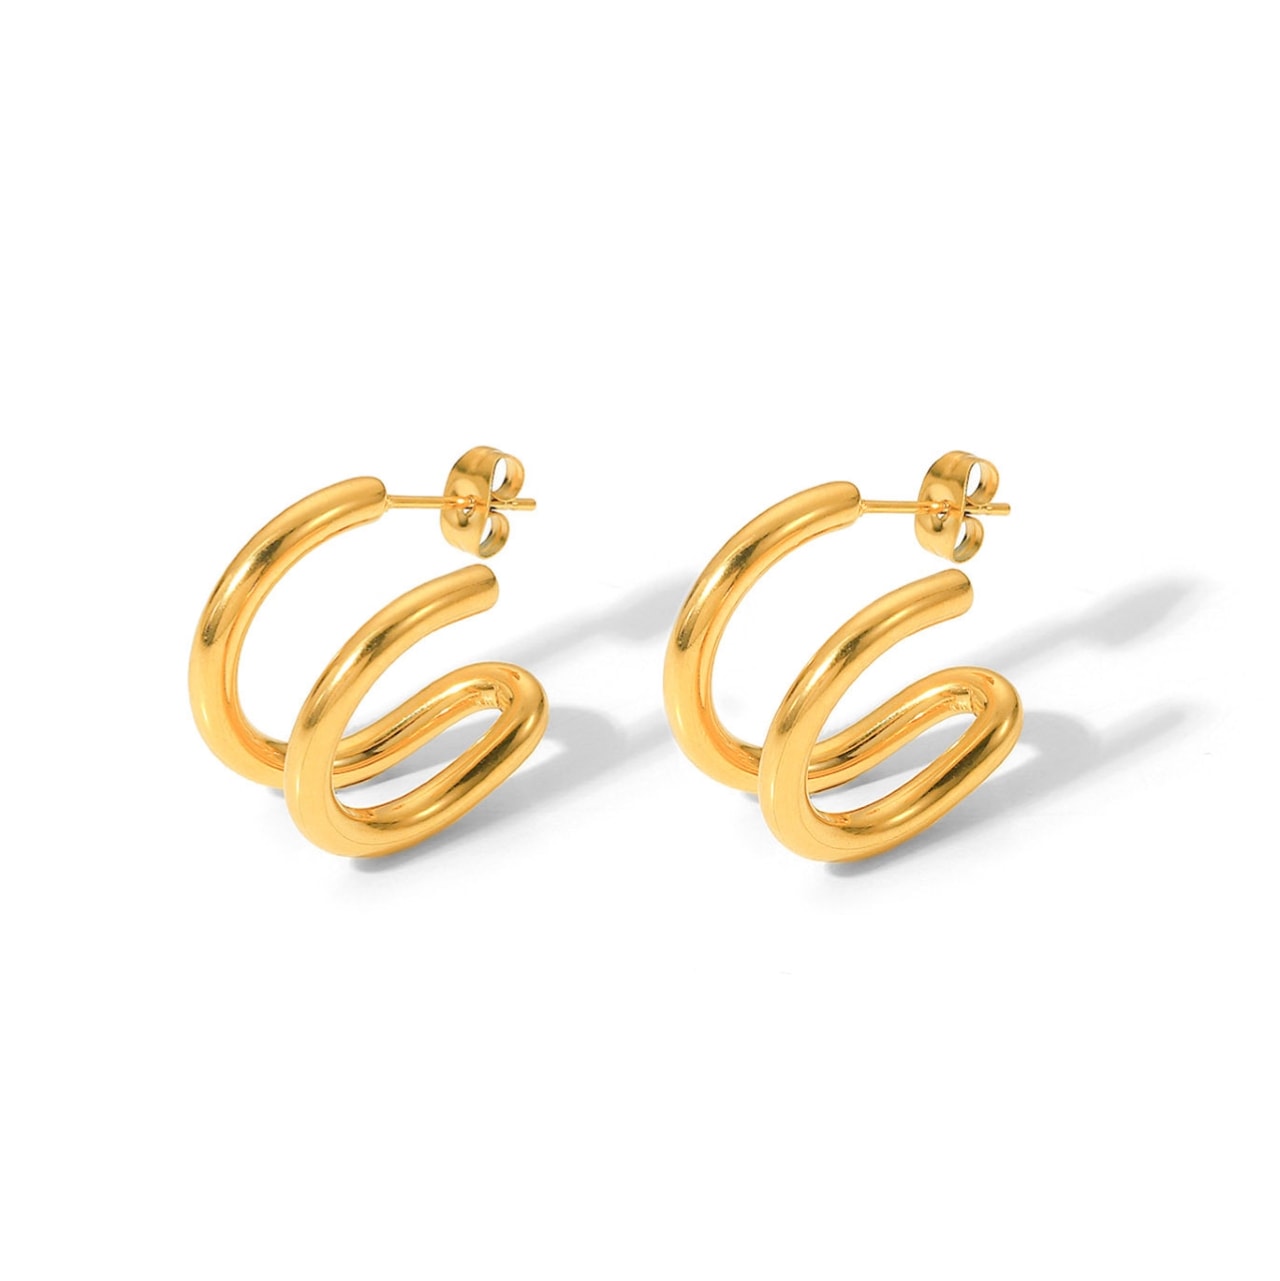 Gold and Silver Dual-tone C-shaped 18k Gold-plated Earrings - LUELLA